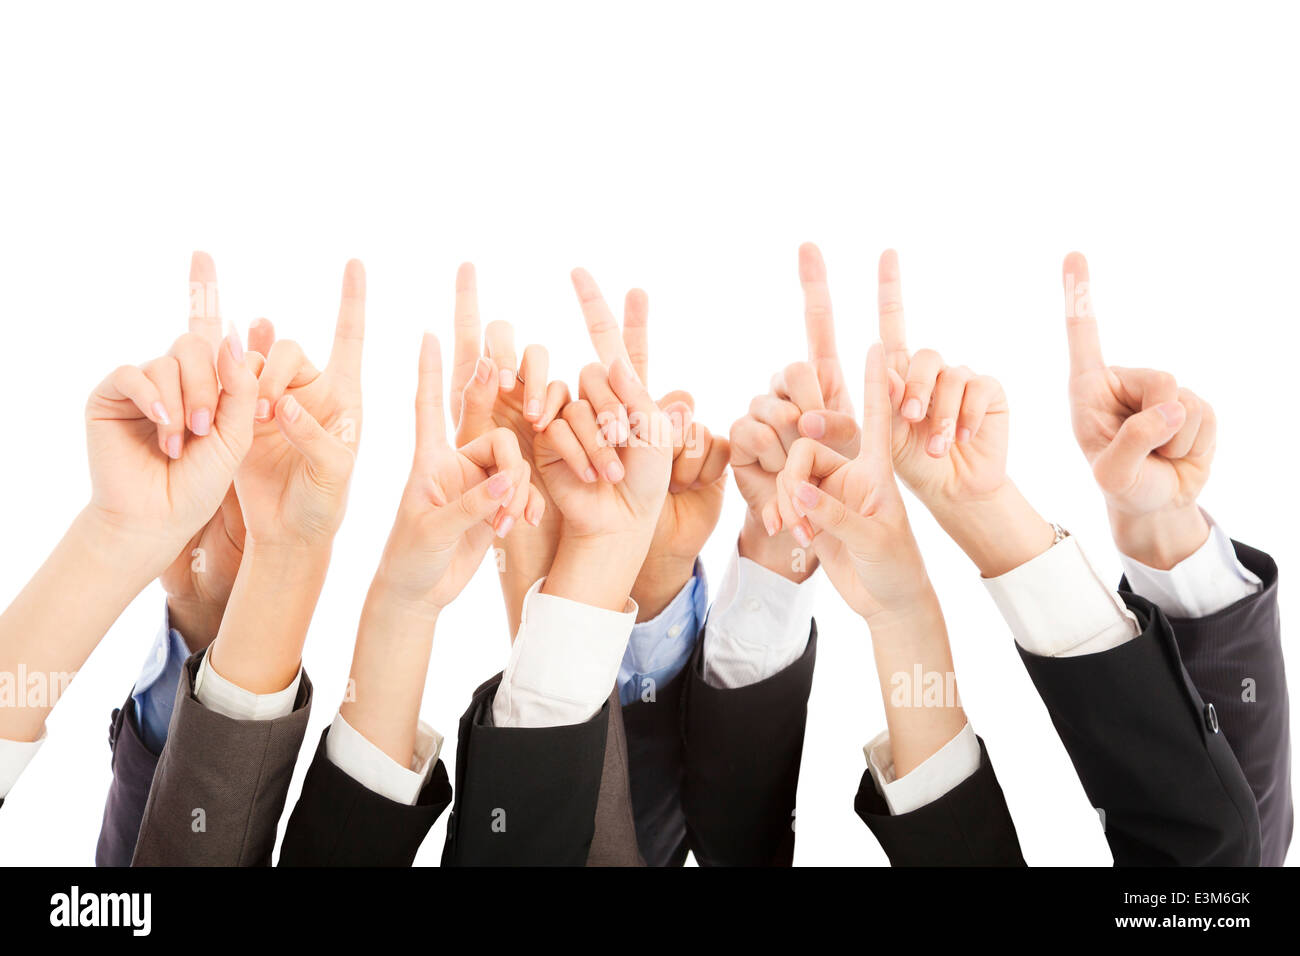 group of business people hands point upward together Stock Photo